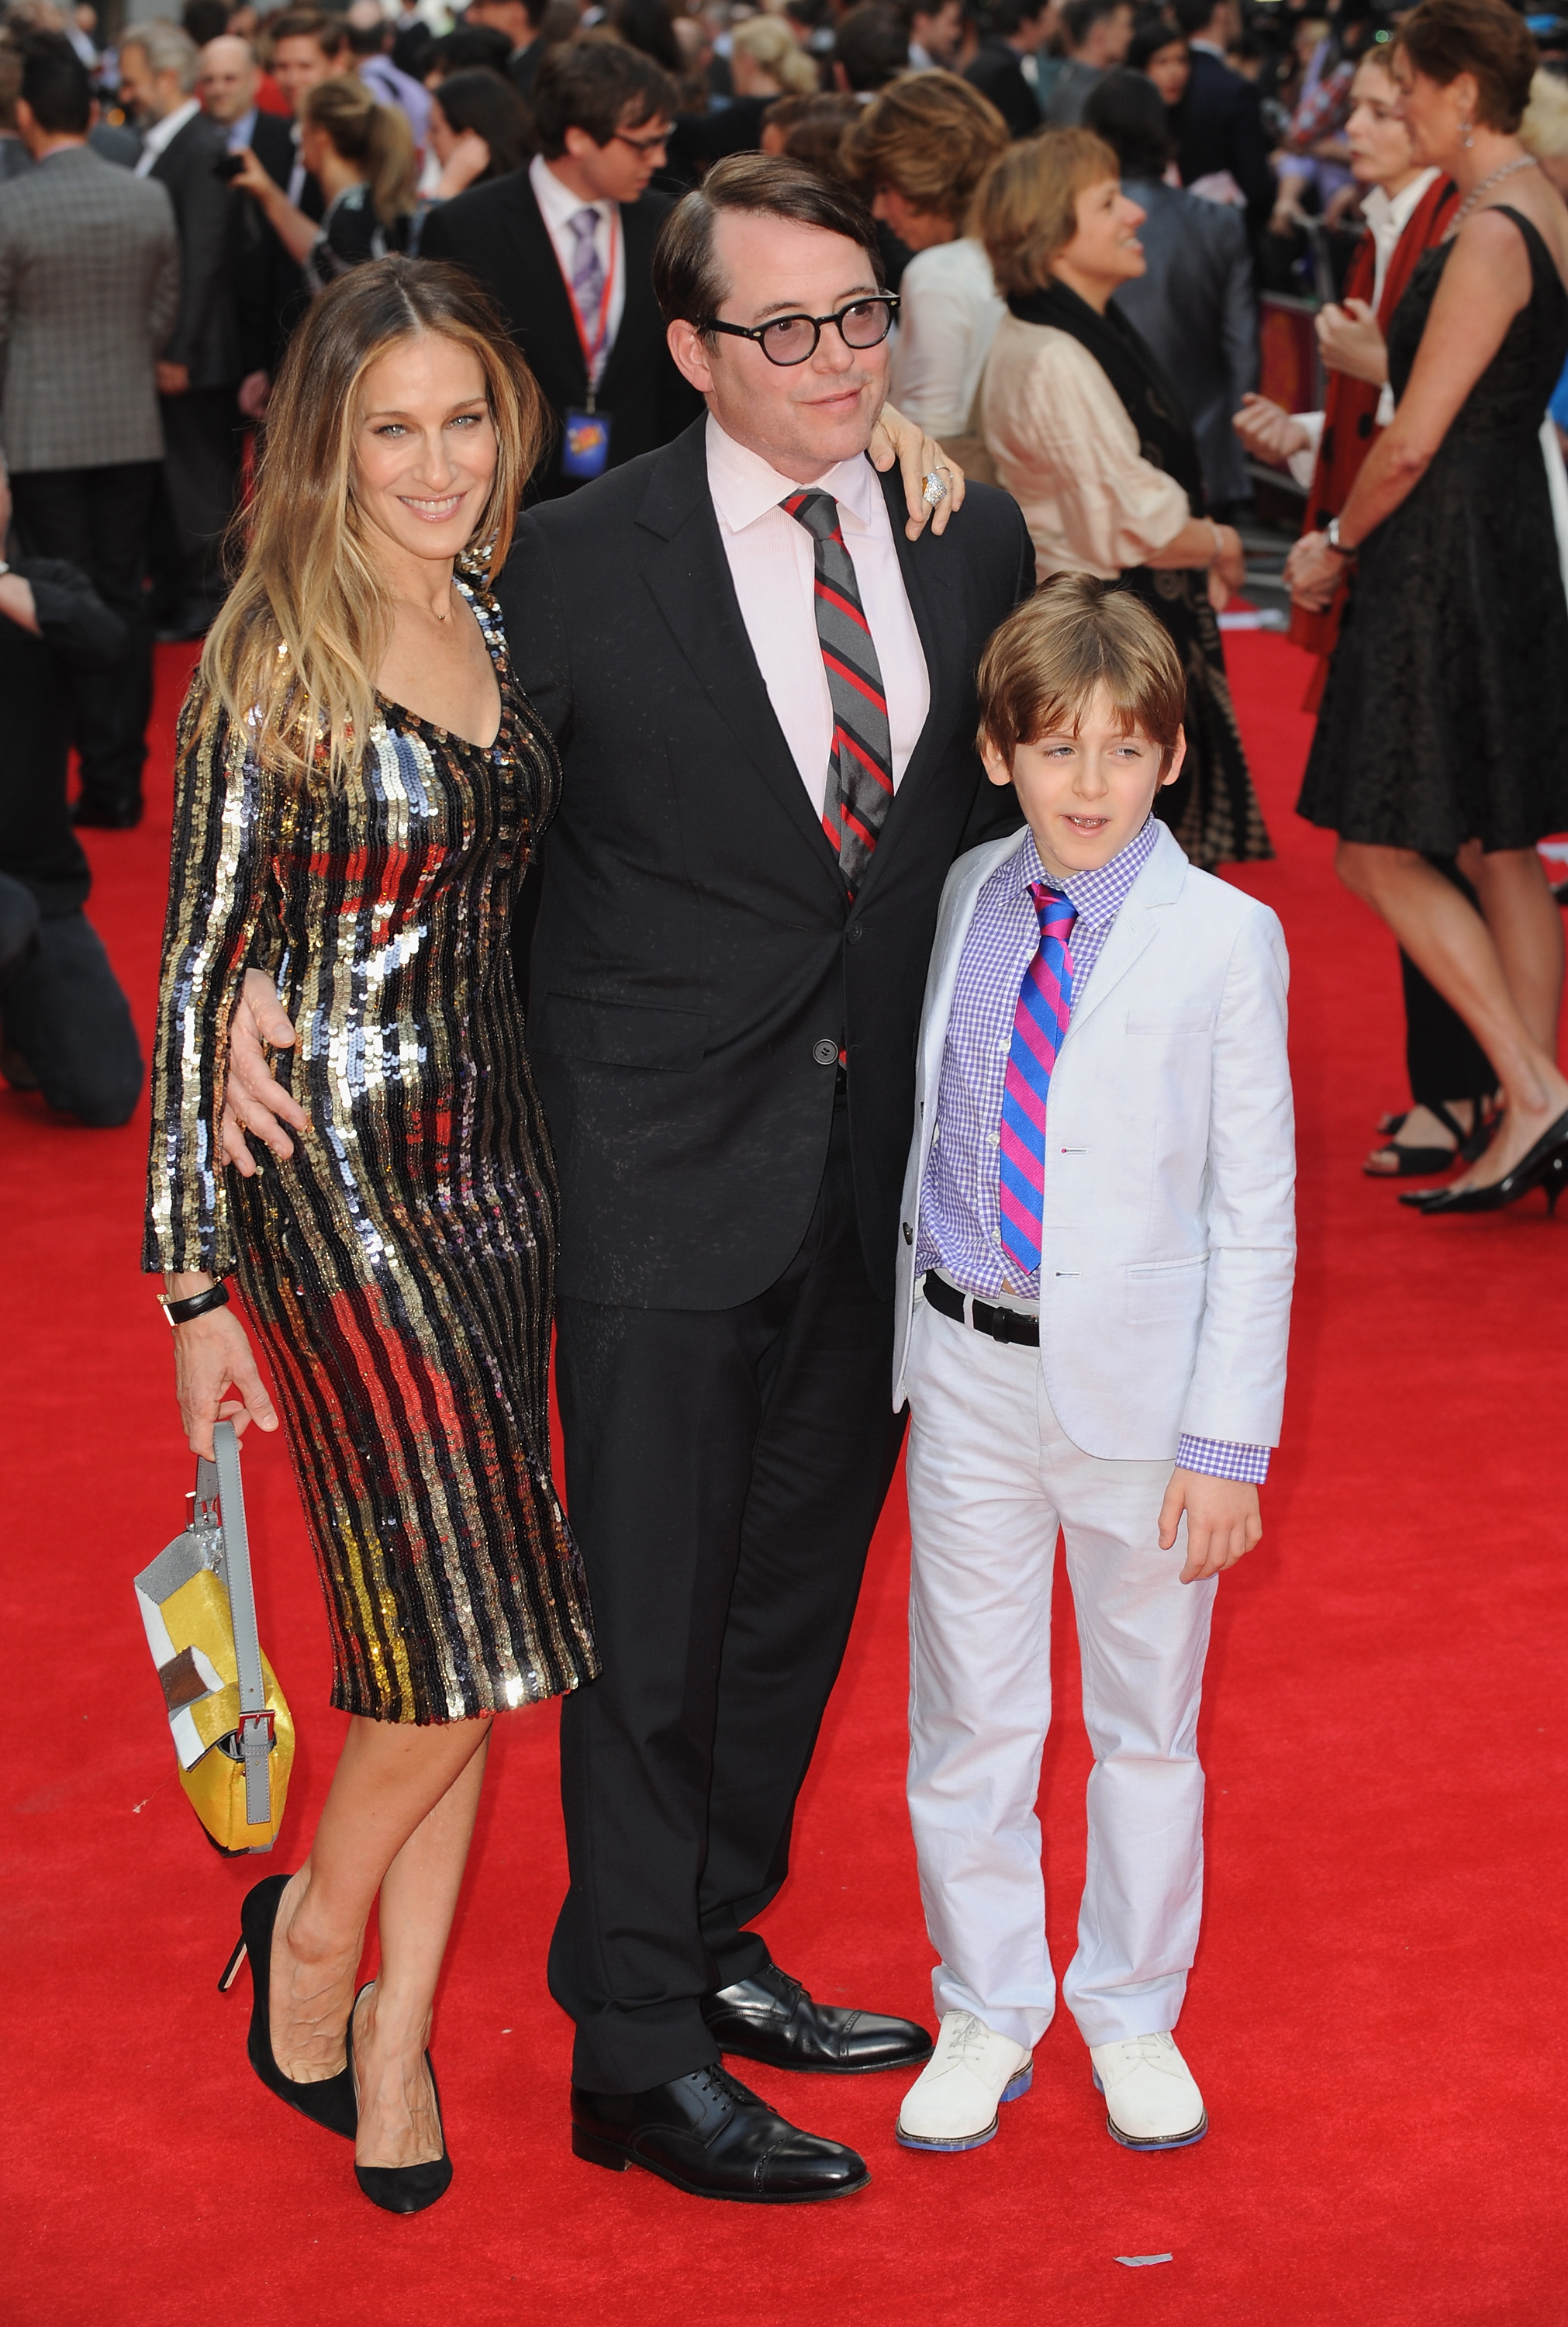 Sarah Jessica Parker, Matthew Broderick, and James Broderick at the press night for "Charlie and the Chocolate Factory" at Theatre Royal on June 25, 2013, in London, England | Source: Getty Images